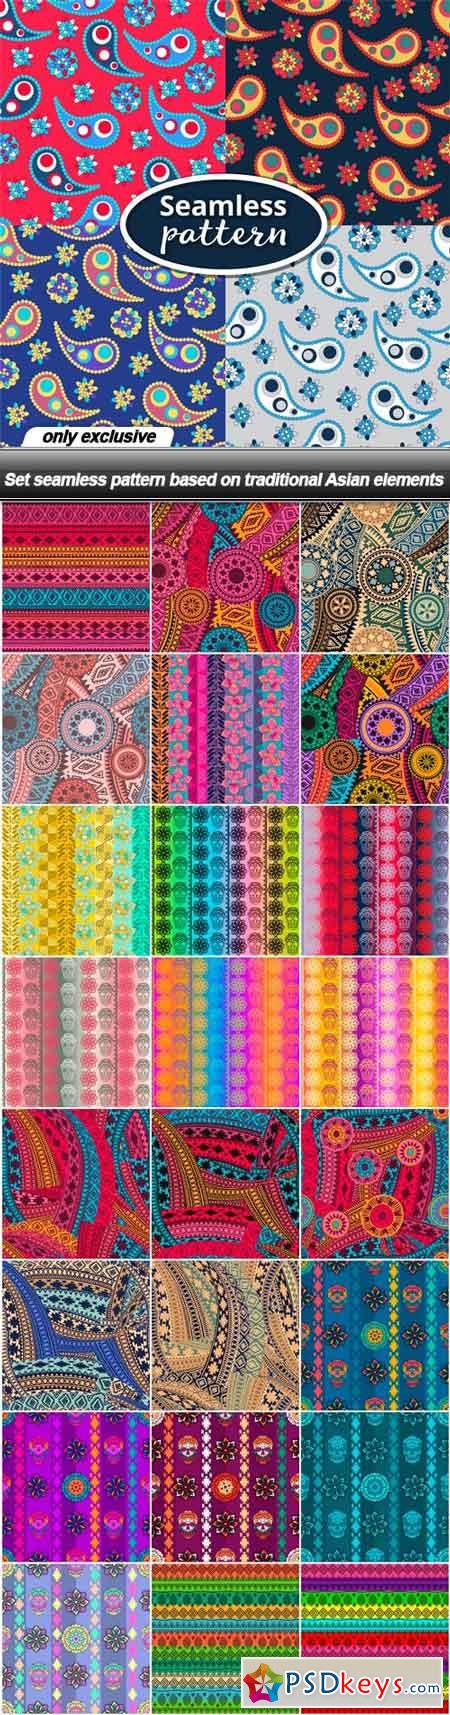 Set seamless pattern based on traditional Asian elements - 25 EPS